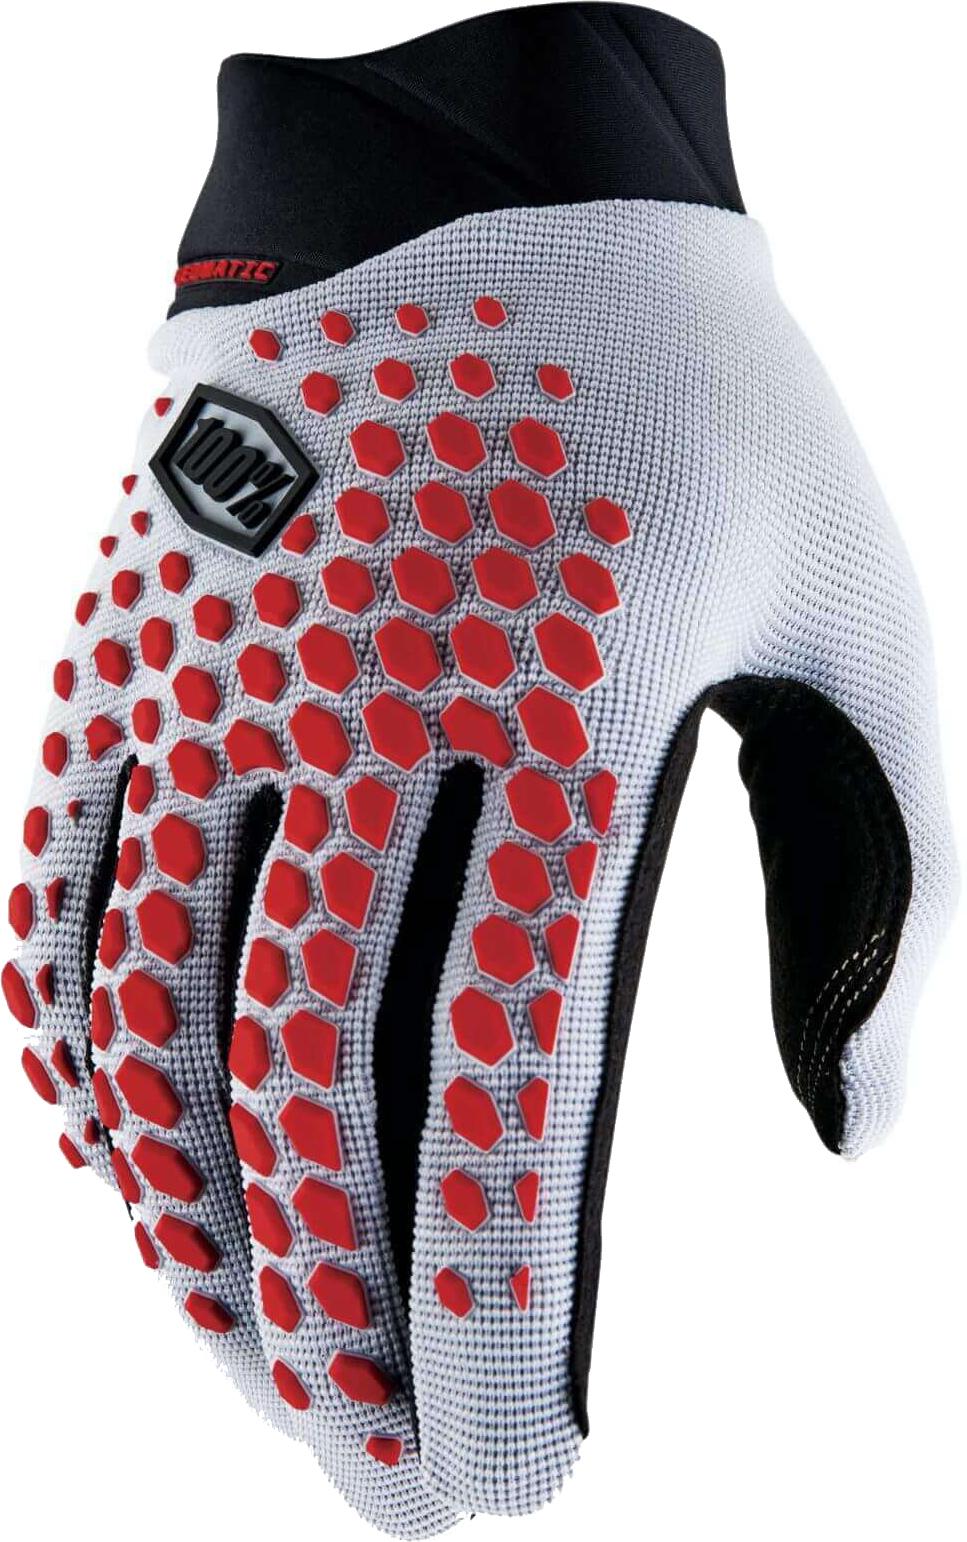 100% Geomatic Glove - Grey/racer Red